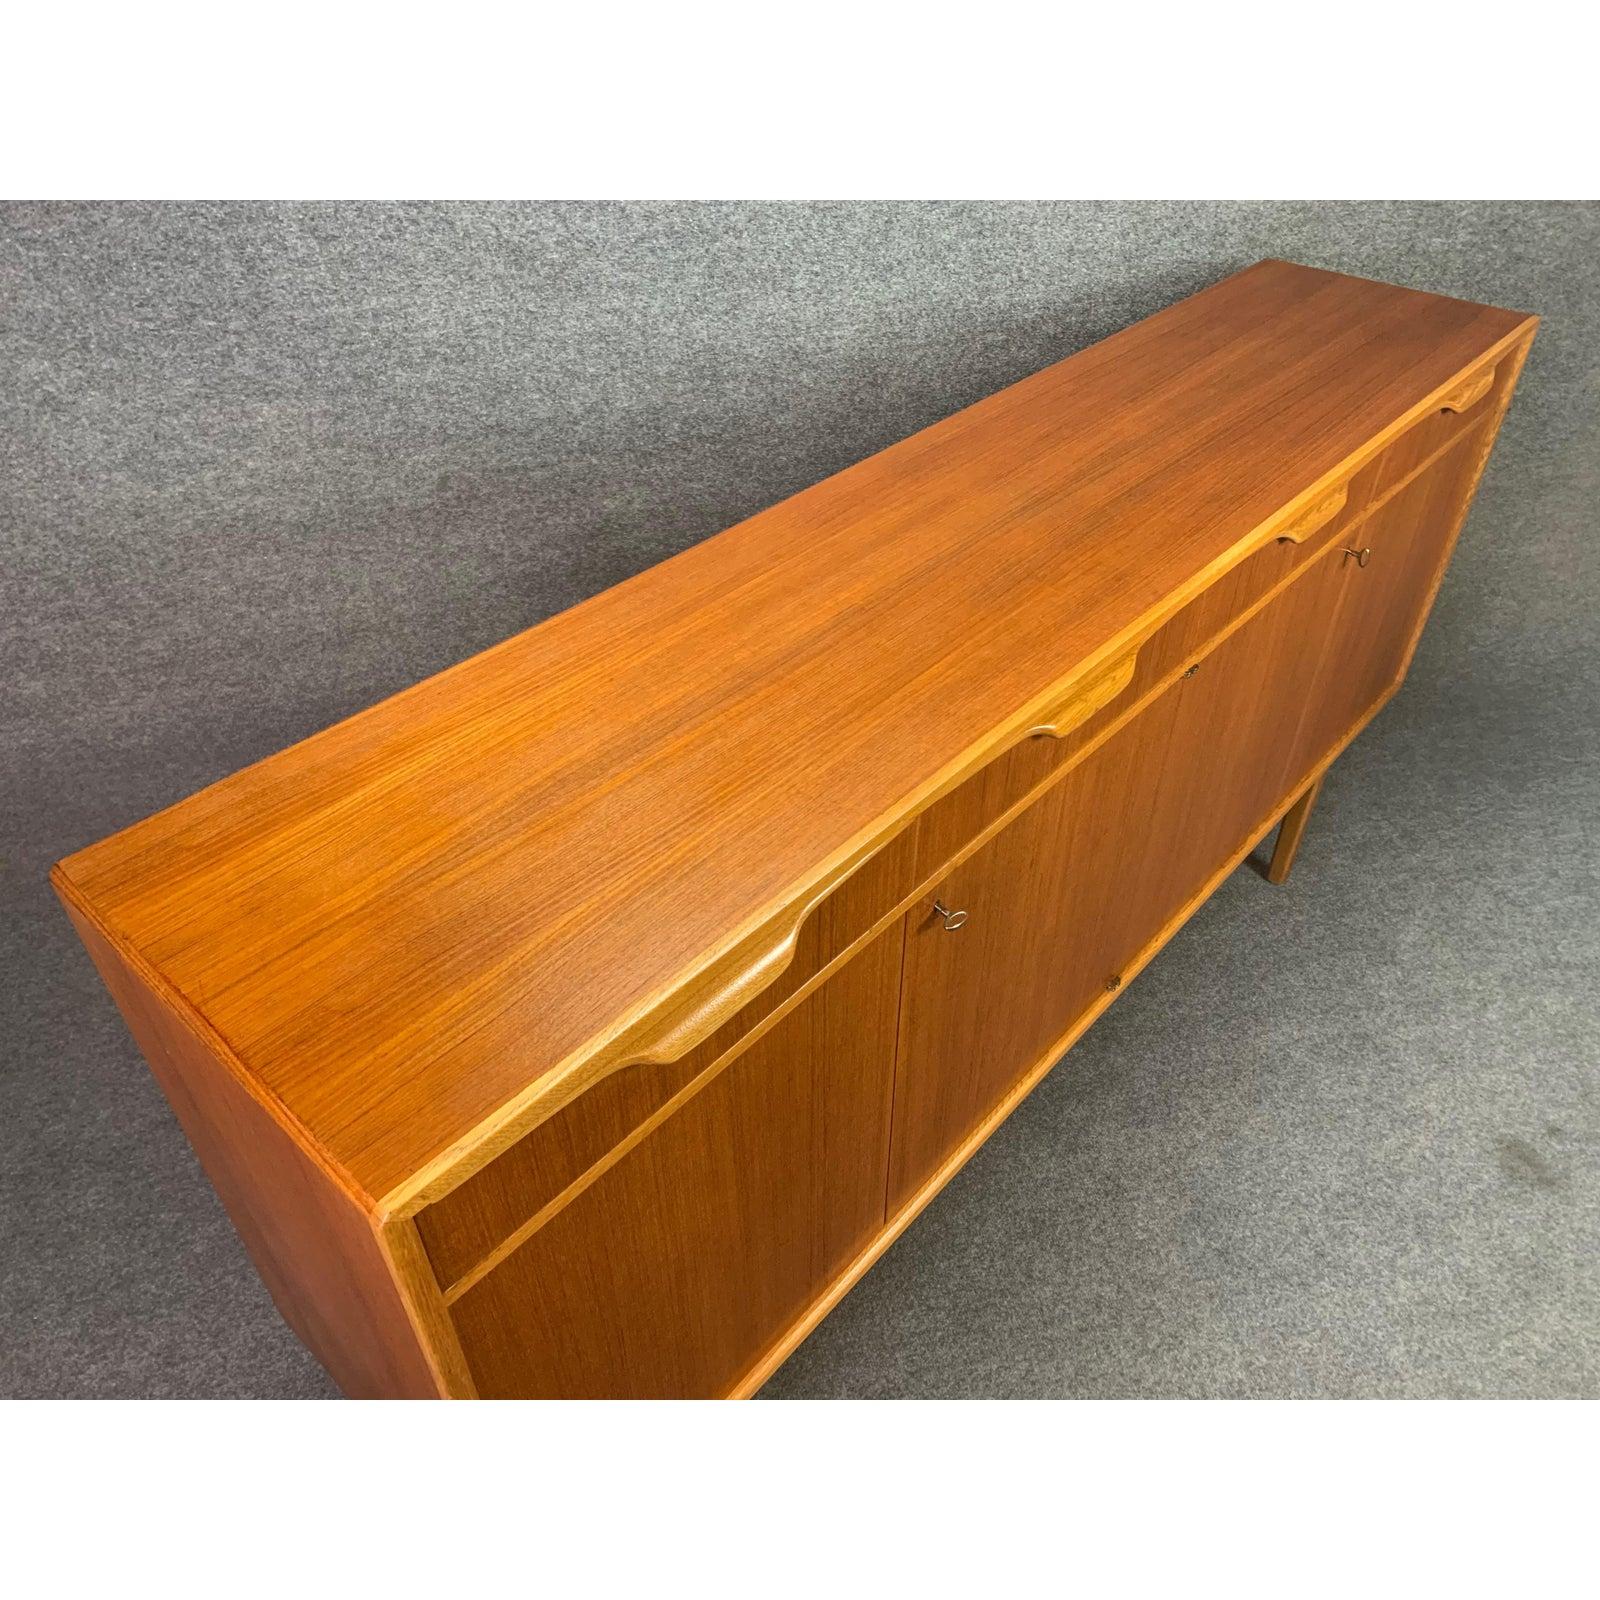 $300 WHITE GLOVE DELIVERY SHIPPING TO KANSAS CITY, MO
Here is a beautiful Scandinavian modern sideboard in teak and oak designed by Bertil Fridhagen and manufactured by Bodafors in Sweden, 1960.
This exquisite piece, recently imported from Stockholm